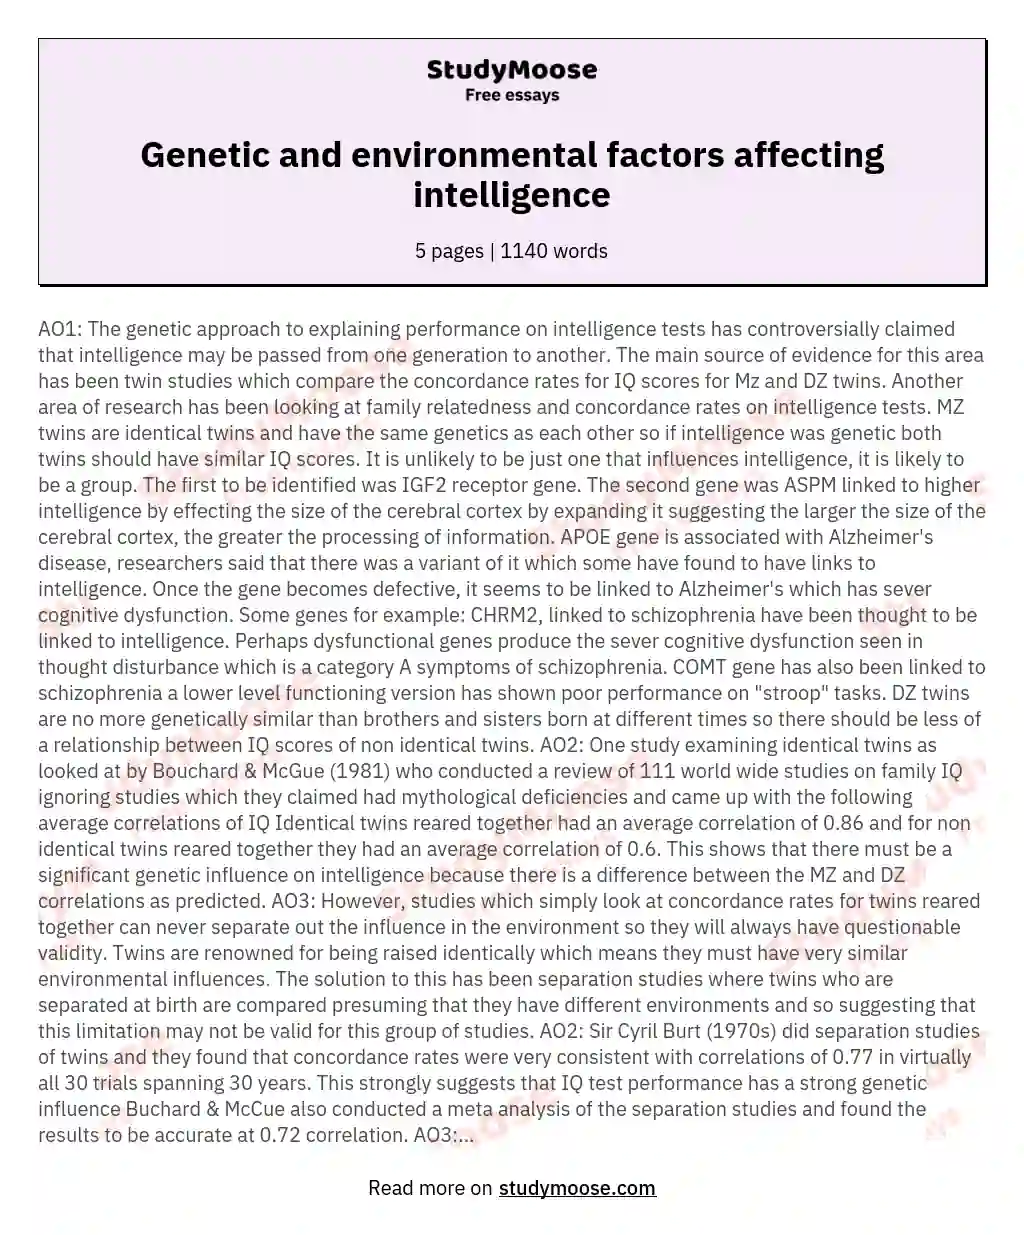 Genetic and environmental factors affecting intelligence essay